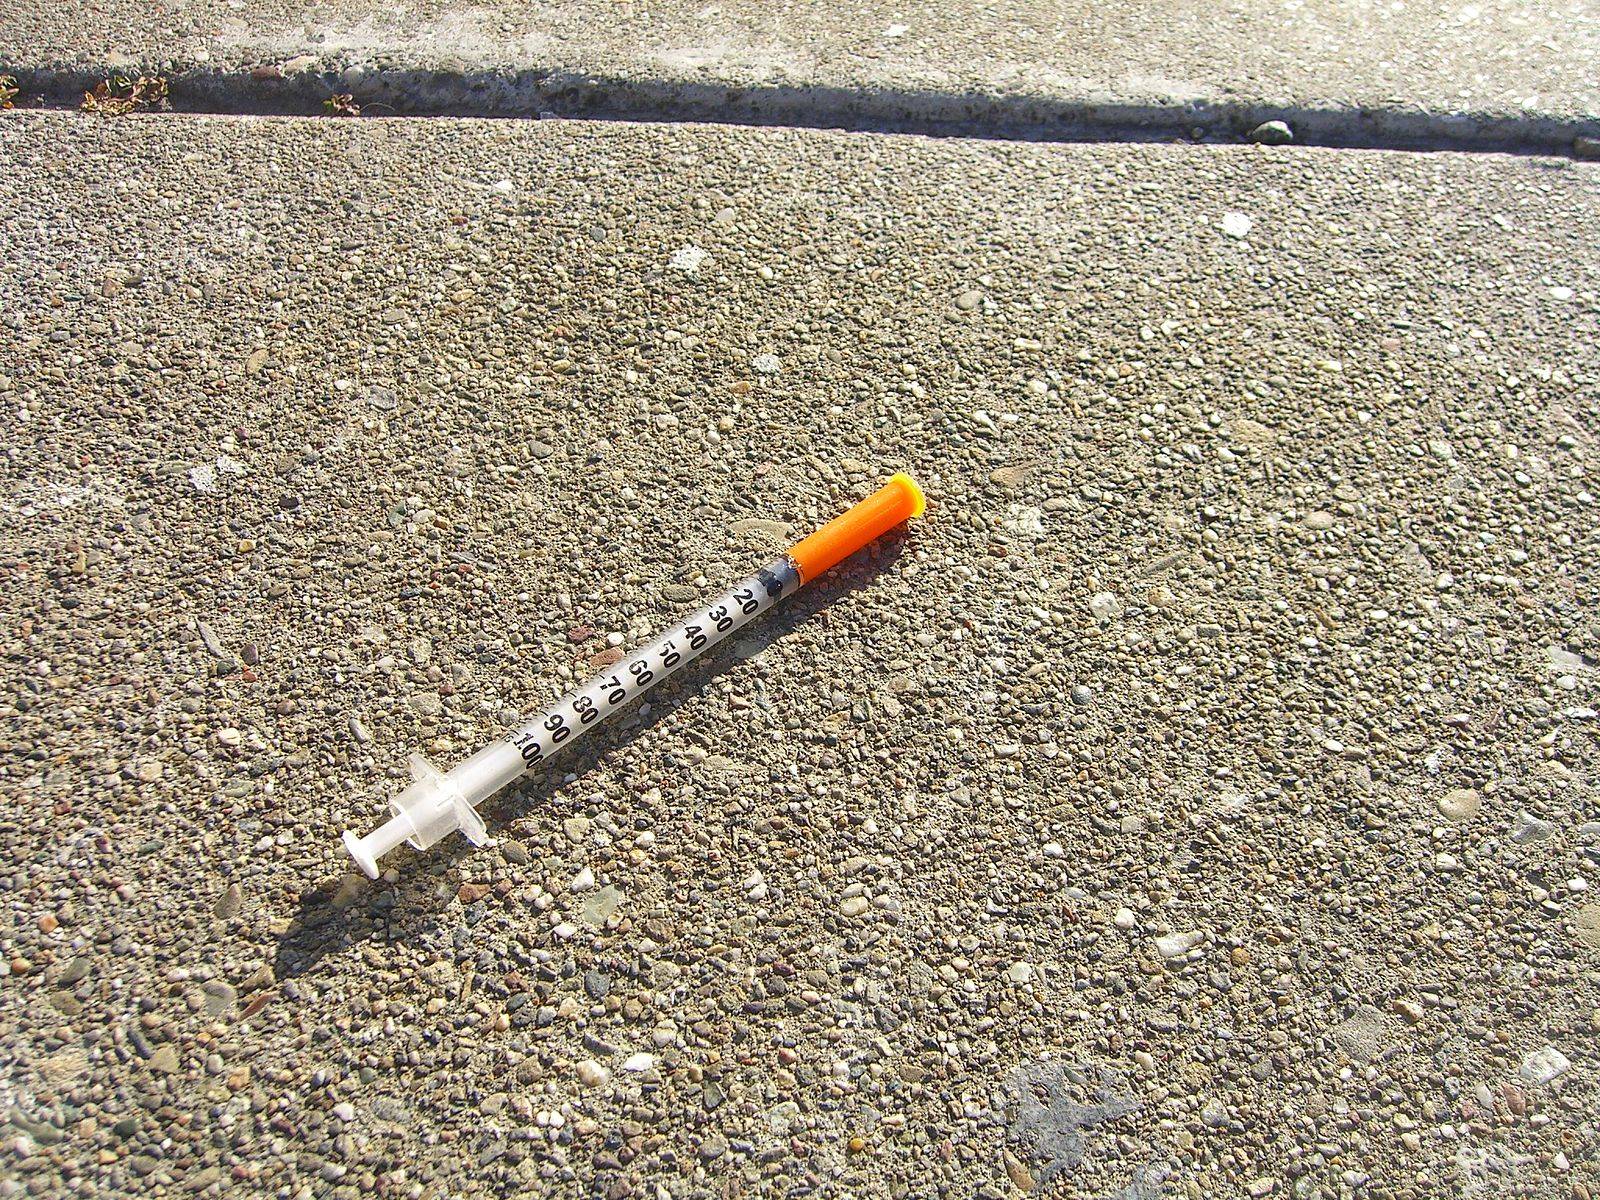 Officials Warn of More HIV Transmissions Among Homeless Drug Users